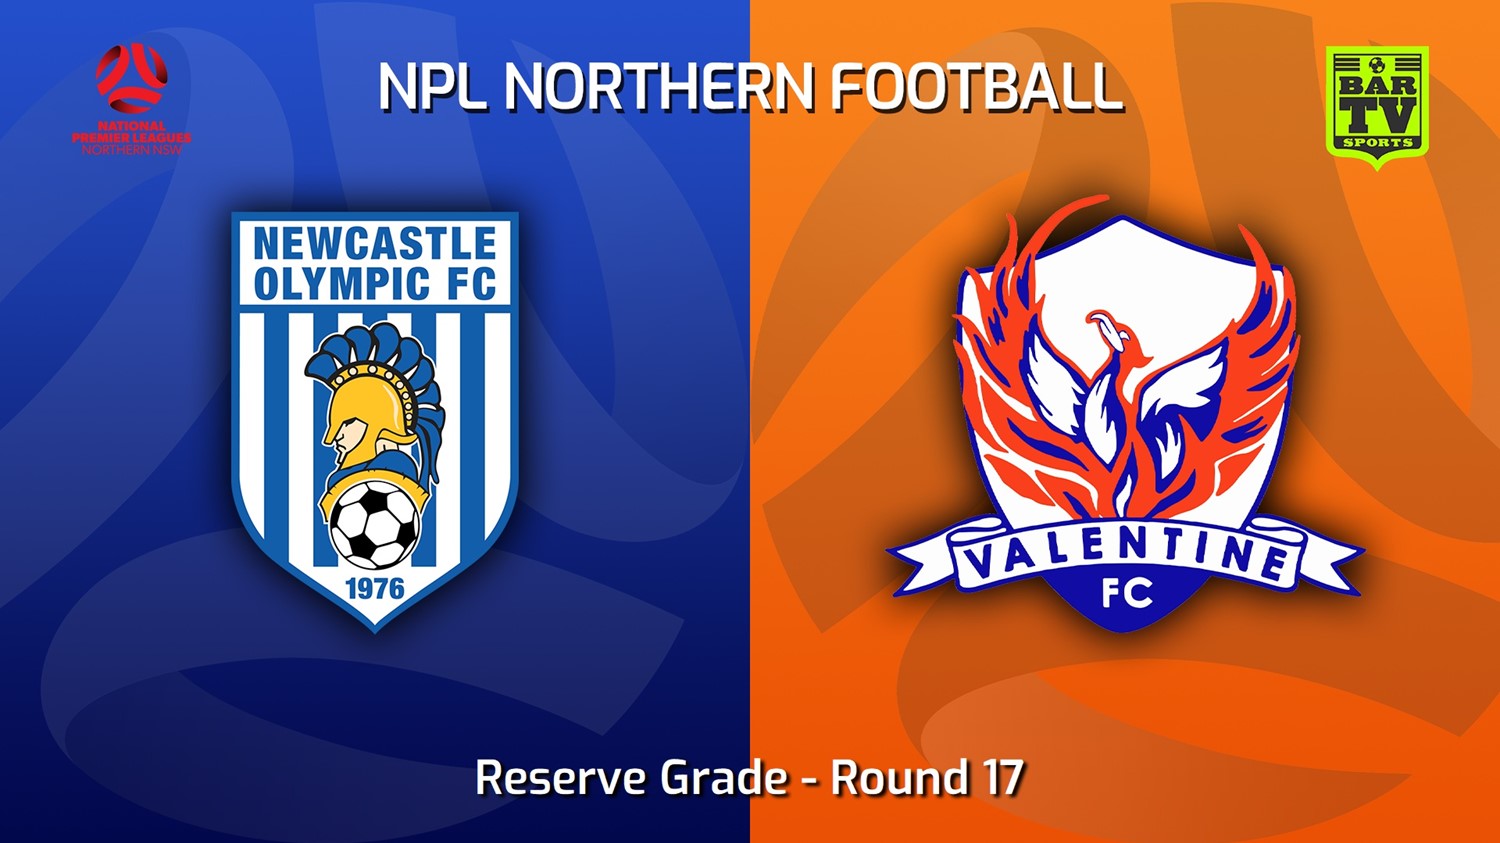 220712-NNSW NPLM Res Round 17 - Newcastle Olympic Res v Valentine Phoenix FC Res Slate Image